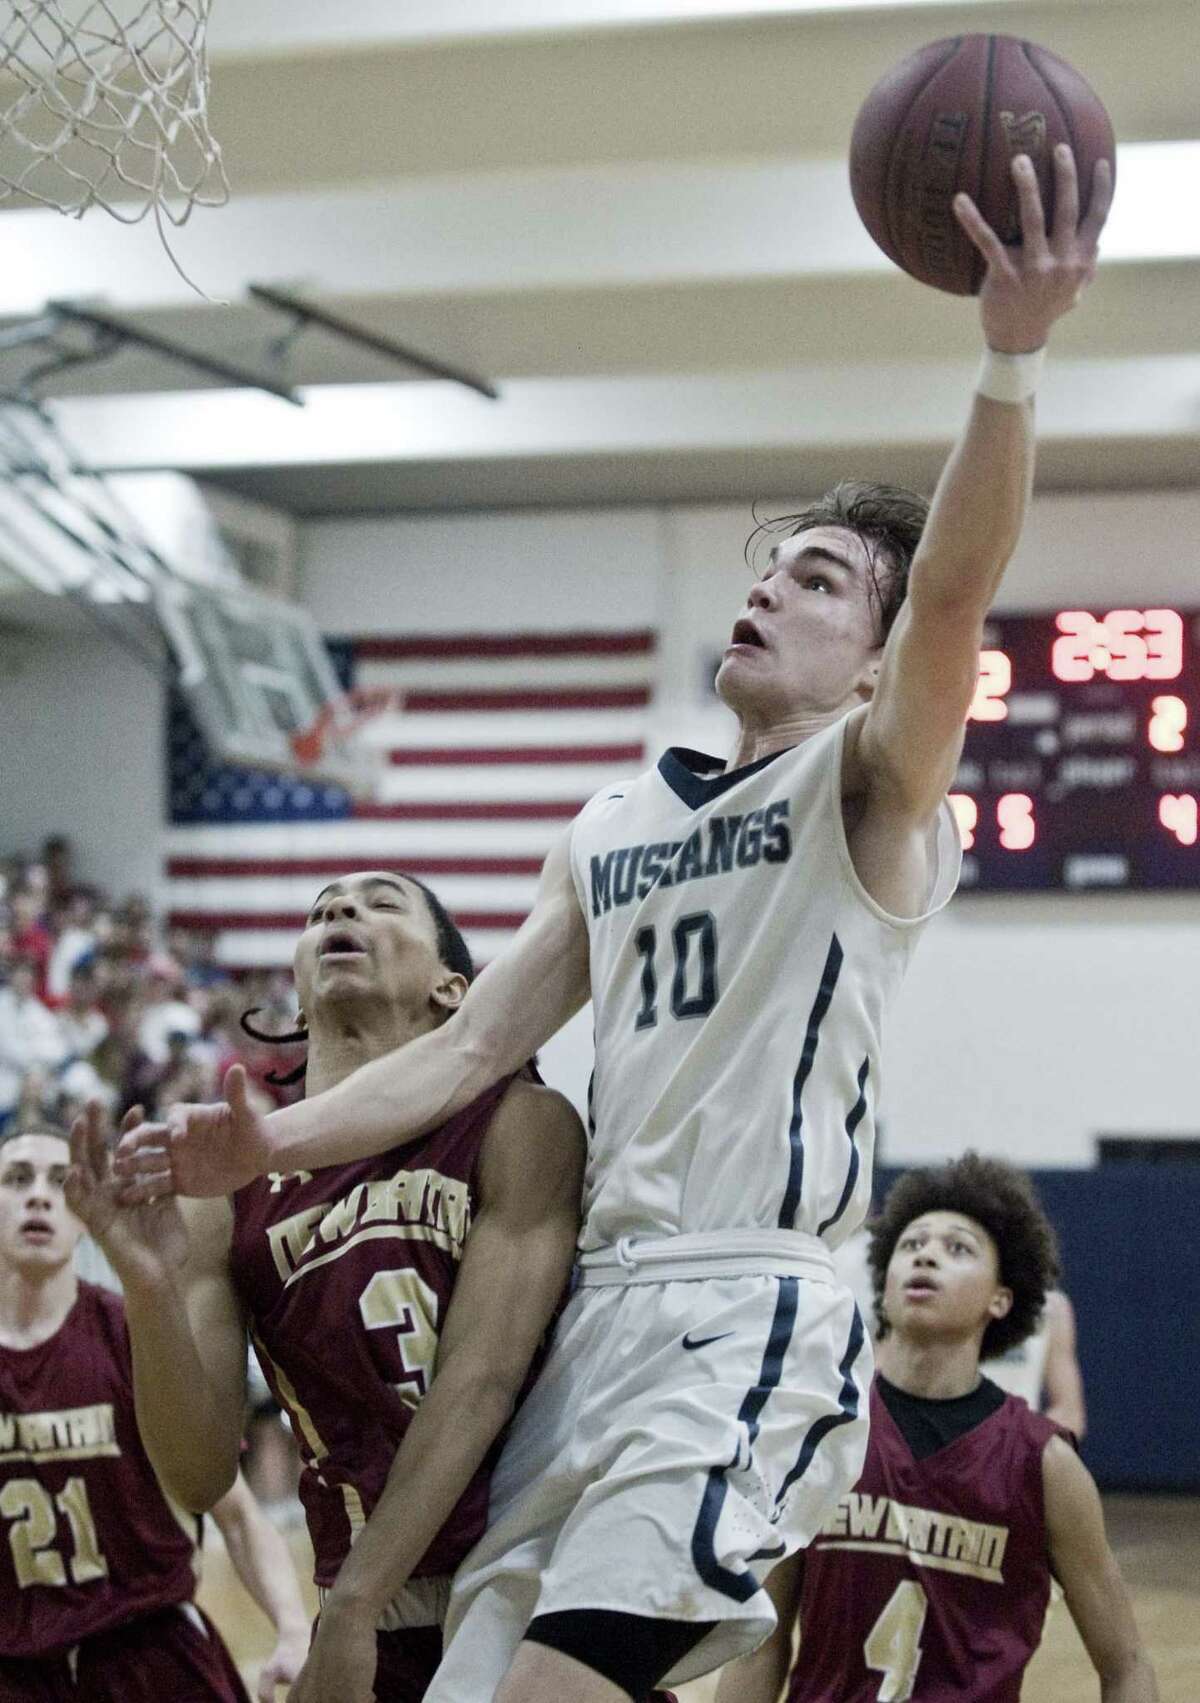 Immaculate High School's Quinn Guth rises for a shot in the Division II boys basketball quarterfinals against New Britain High School, played at Immaculate. Monday, March 12, 2018